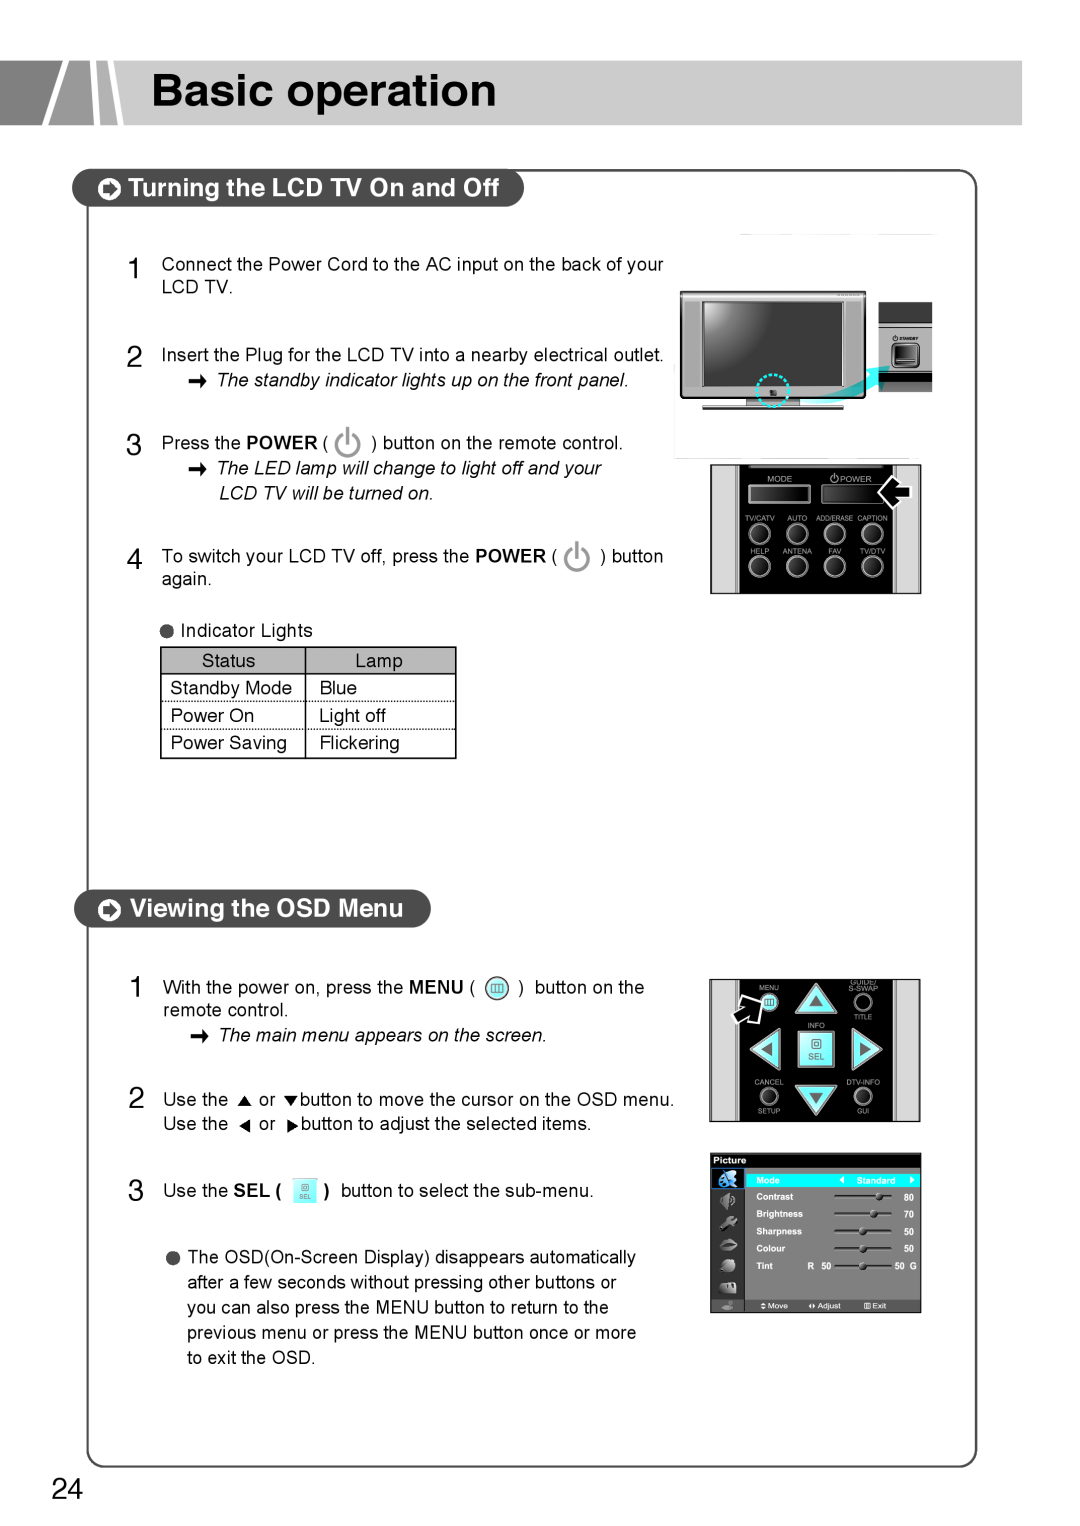 Humax L3040 owner manual Basic operation, Turning the LCD TV On and Off, Viewing the OSD Menu, LCD TV will be turned on 